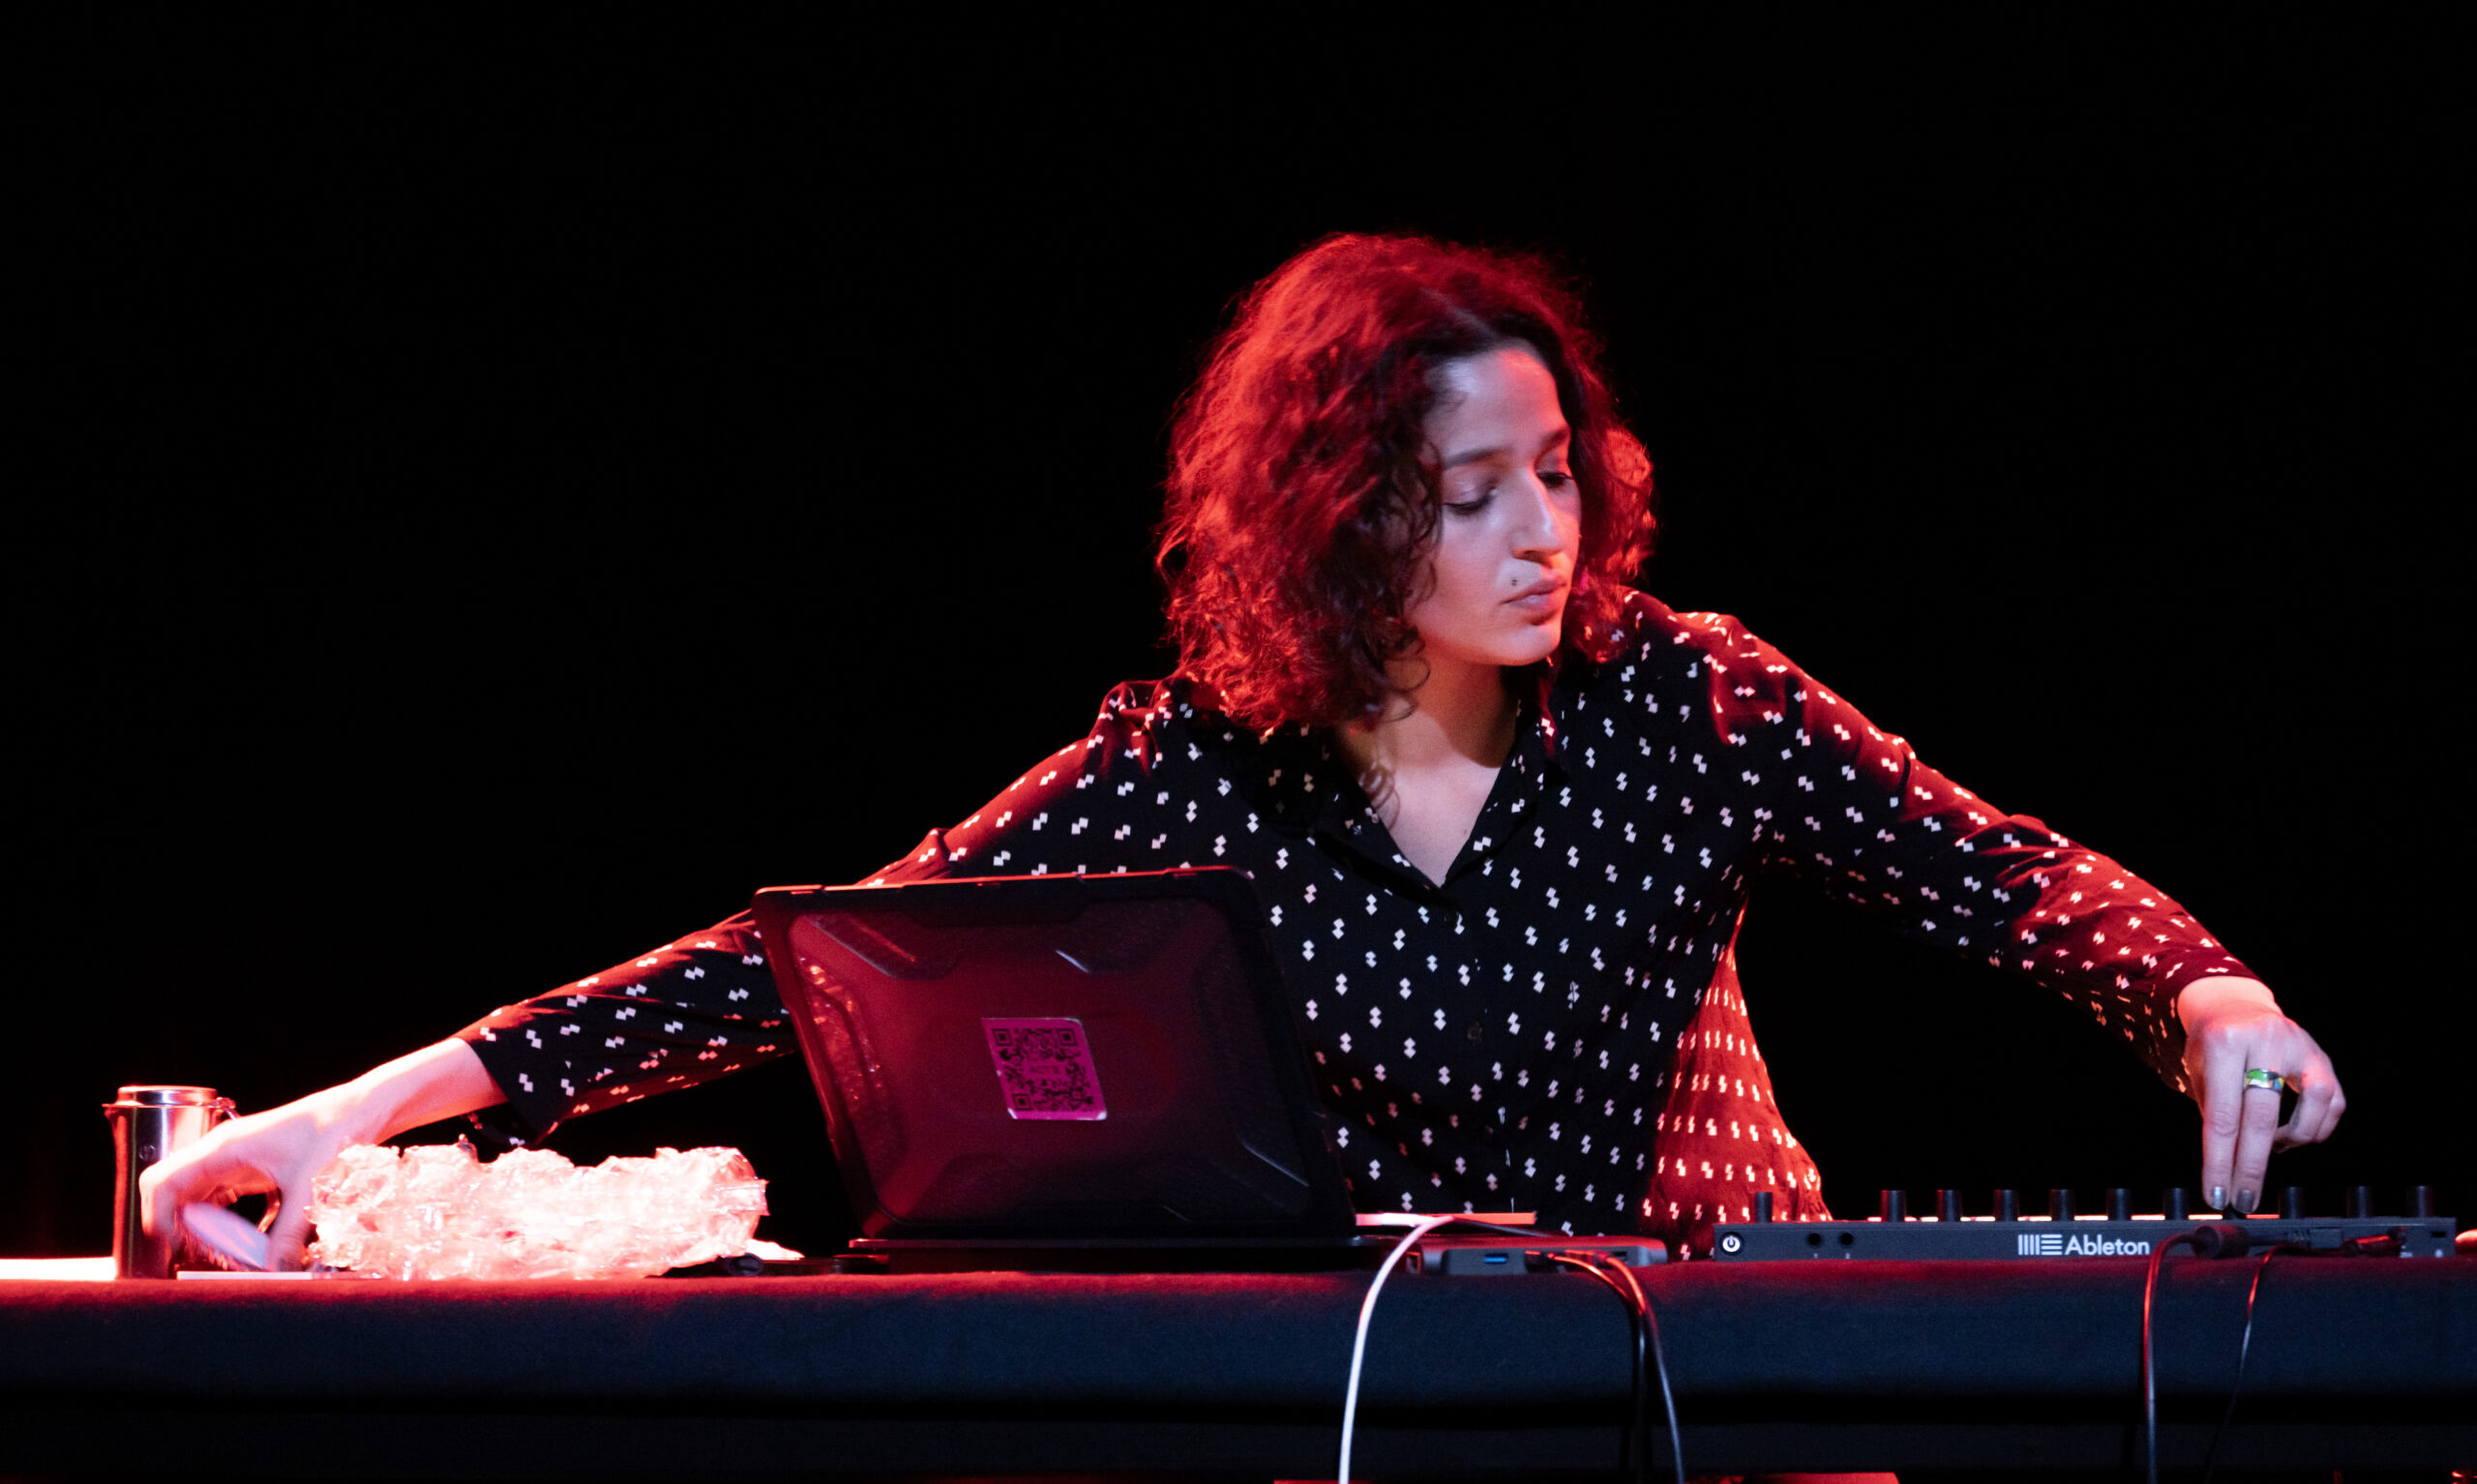 Nour Sokhon on stage with laptop and ableton